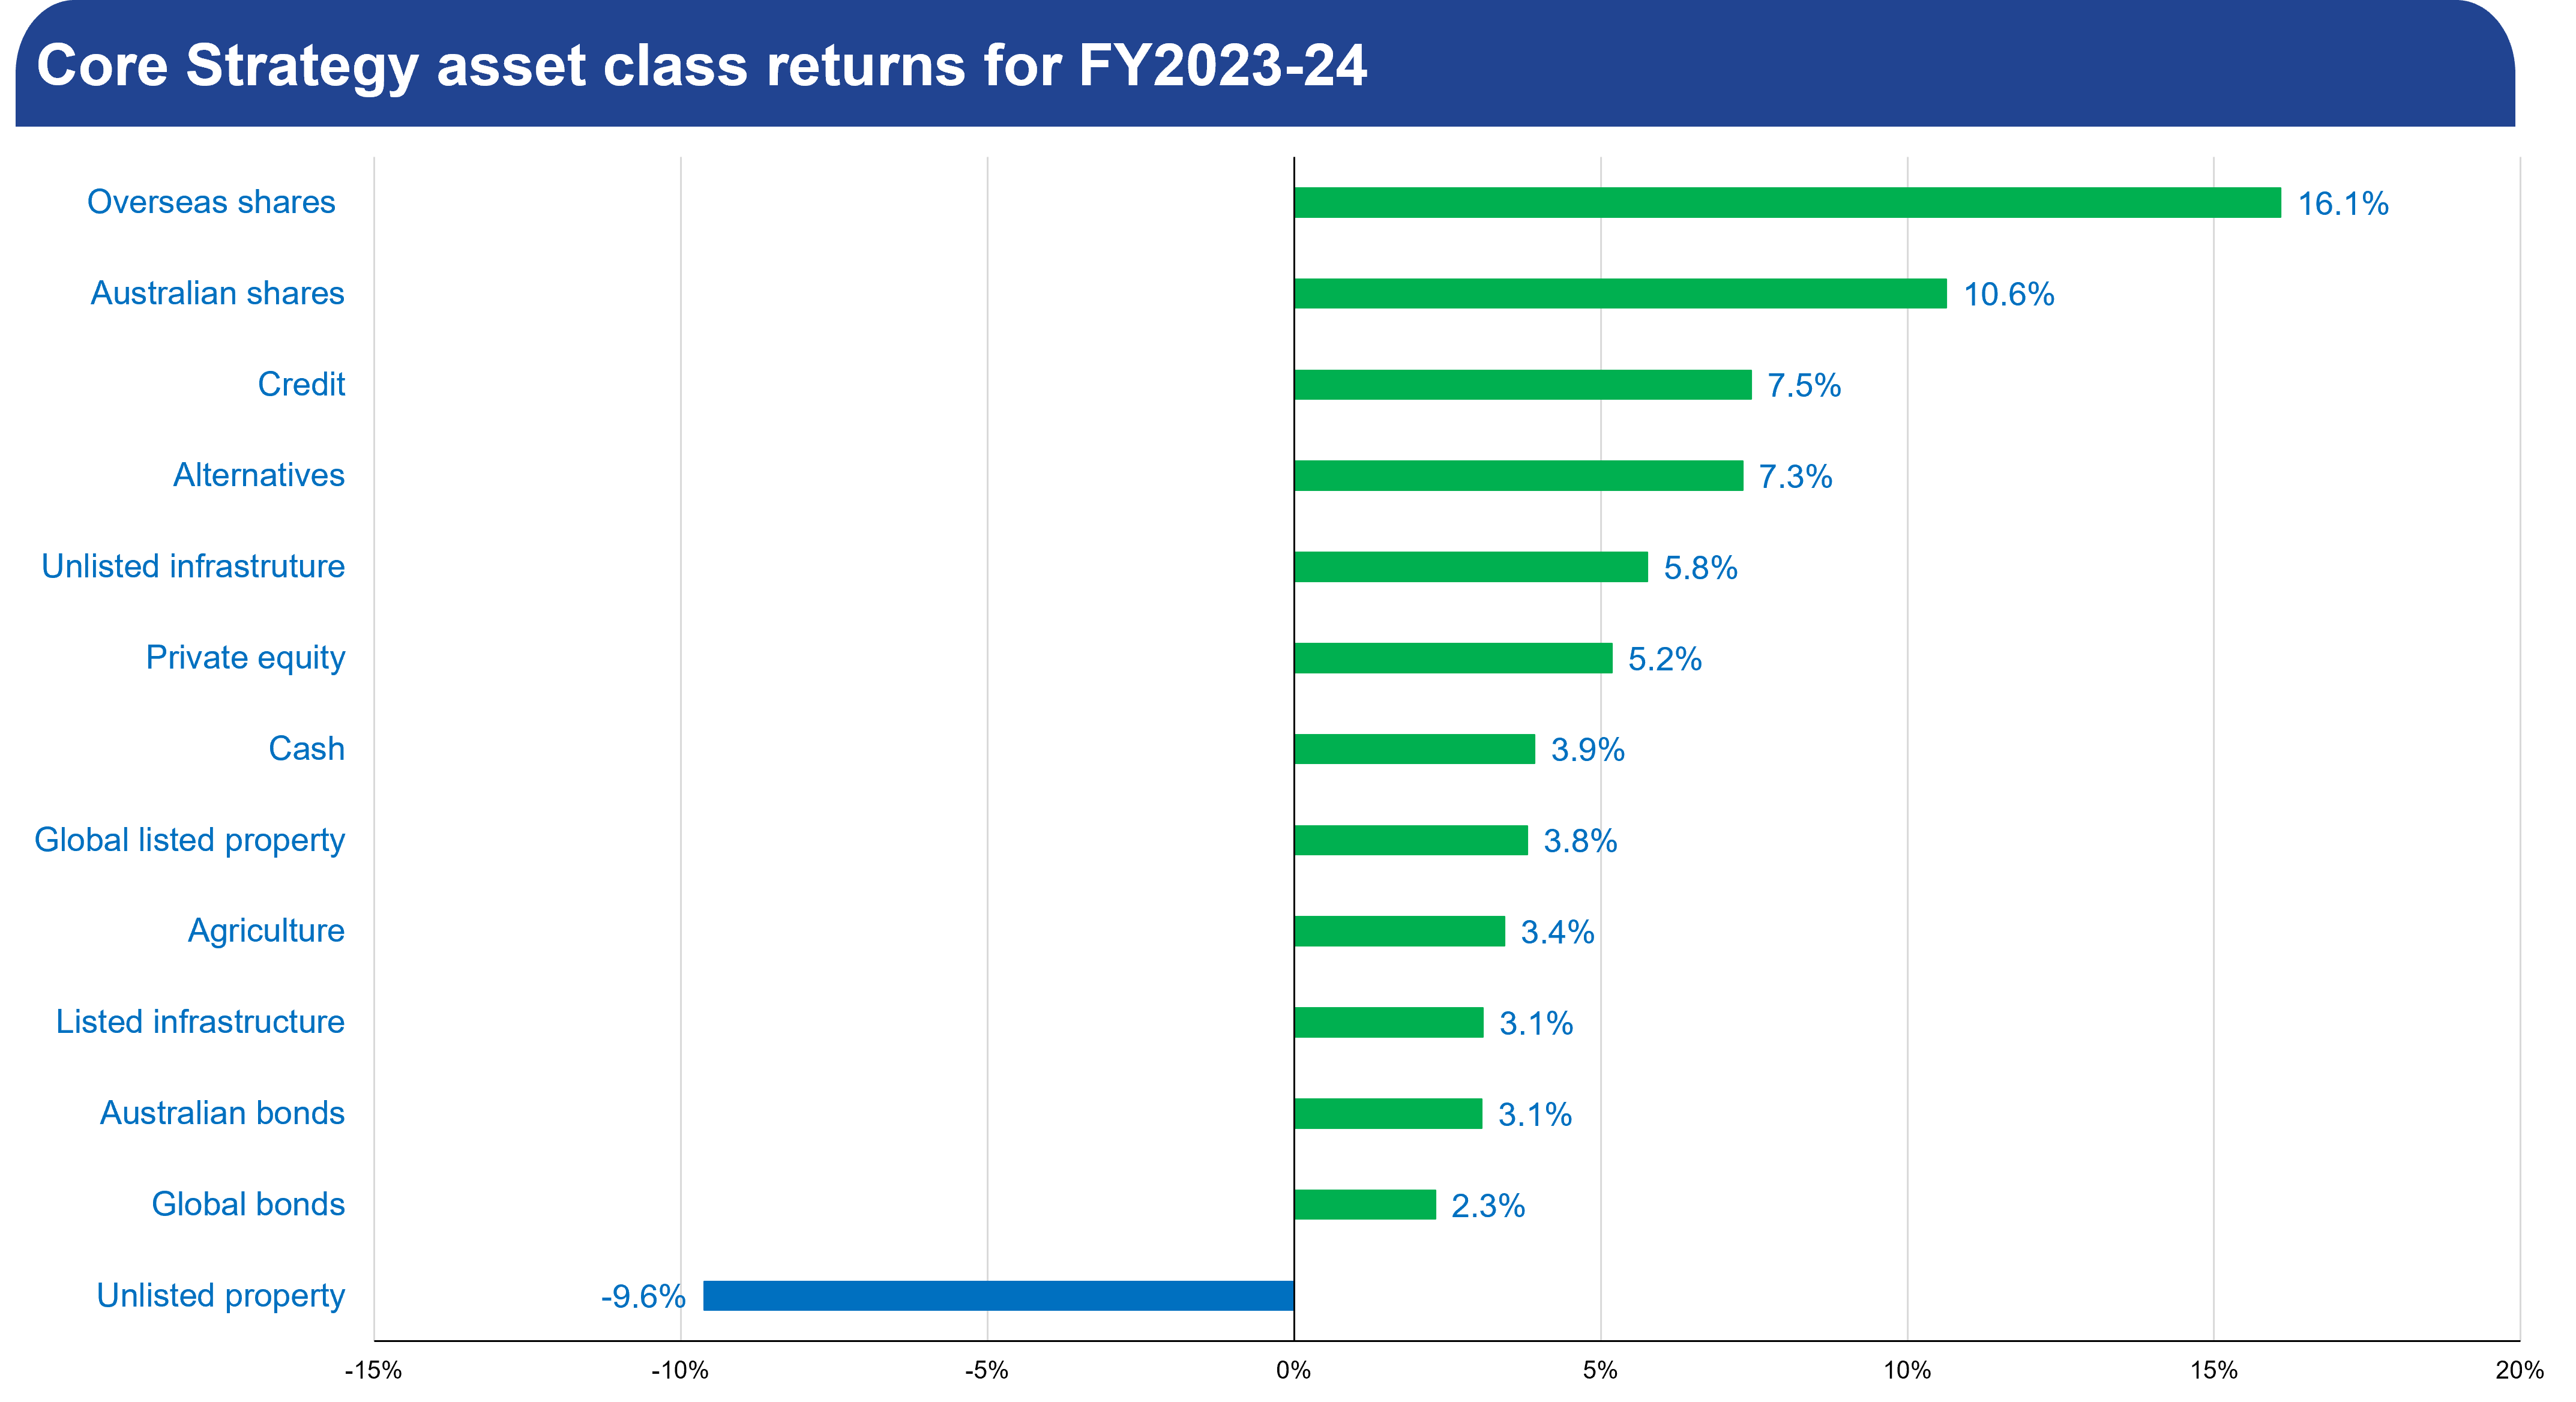 One-year returns to 30 June 2024 for each asset class Rest invests in. Overseas shares are unhedged. (“Listed” means traded on public markets; “unlisted” means private.)